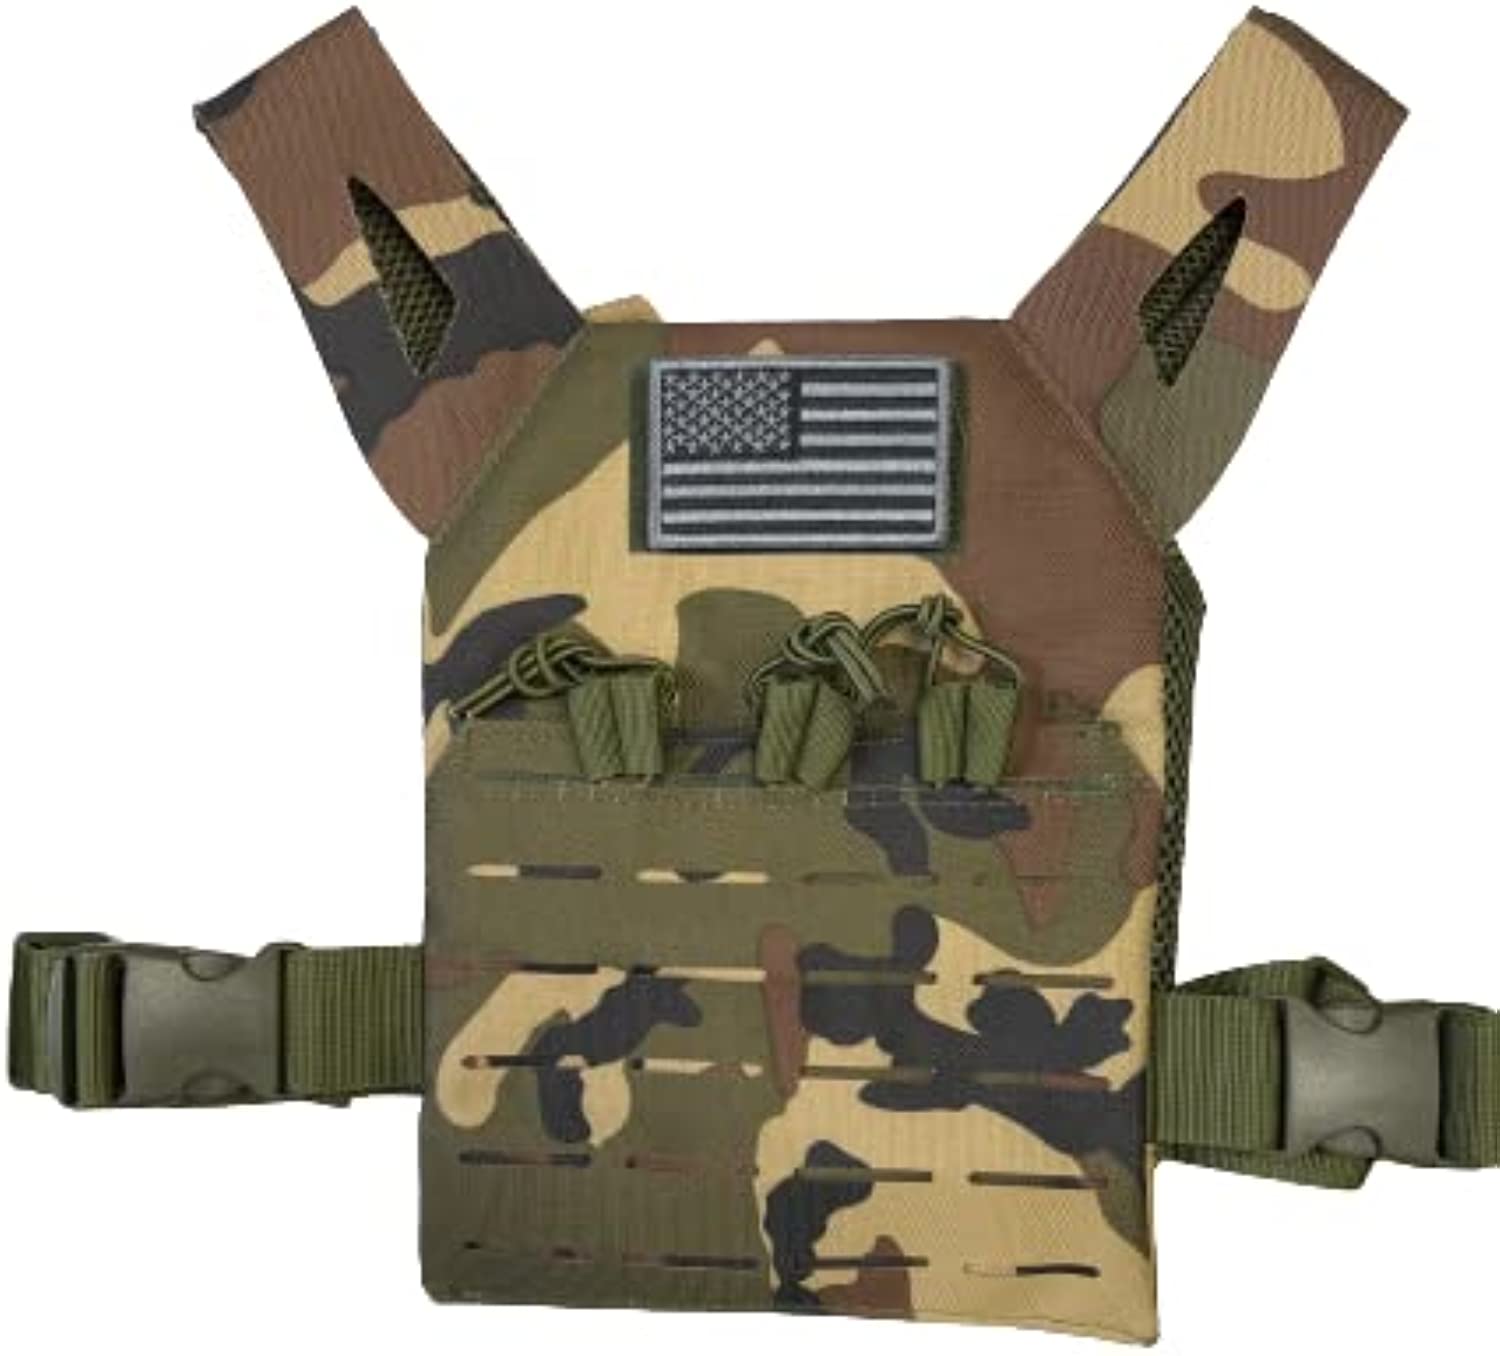 Childrens Small Kids Tactical Airsoft Paintball Vest, Hook and Loop US Flag Patch, Mil Spec PALS Laser cut Molle w/ Mag Pouches (Woodland Camo)